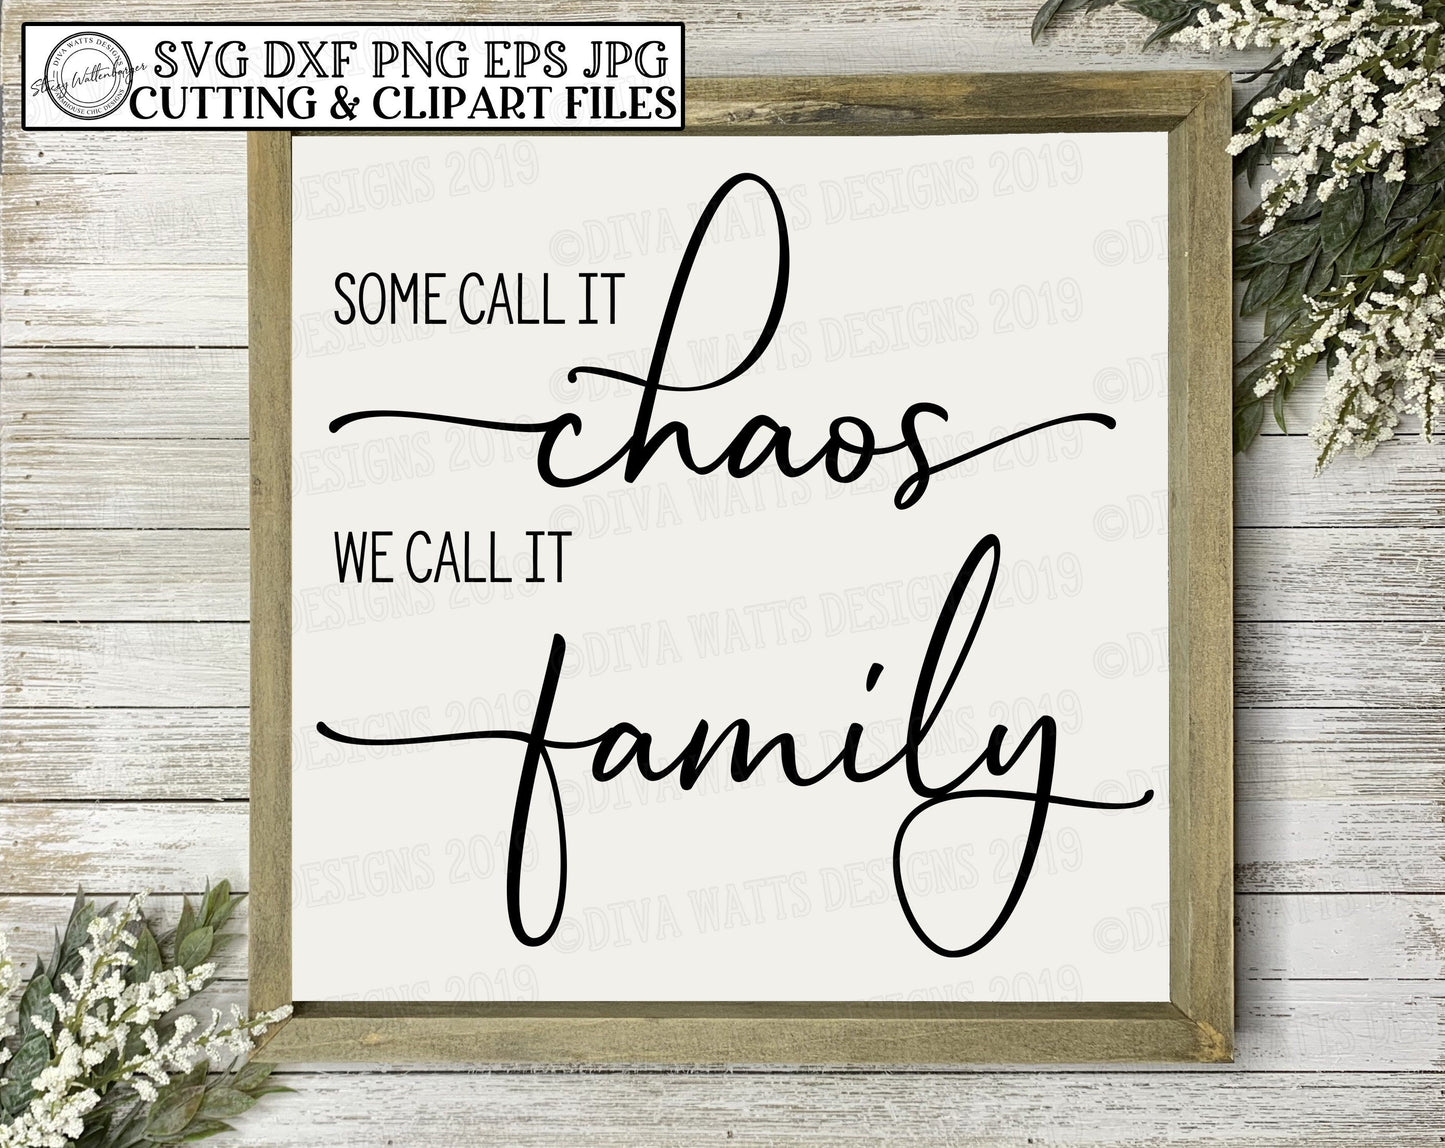 SVG Some Call It Chaos We Call It Family | Cutting File | DXF PNG eps jpg | Instant Download | Vinyl Stencil htv | Sign Shirt | Farmhouse